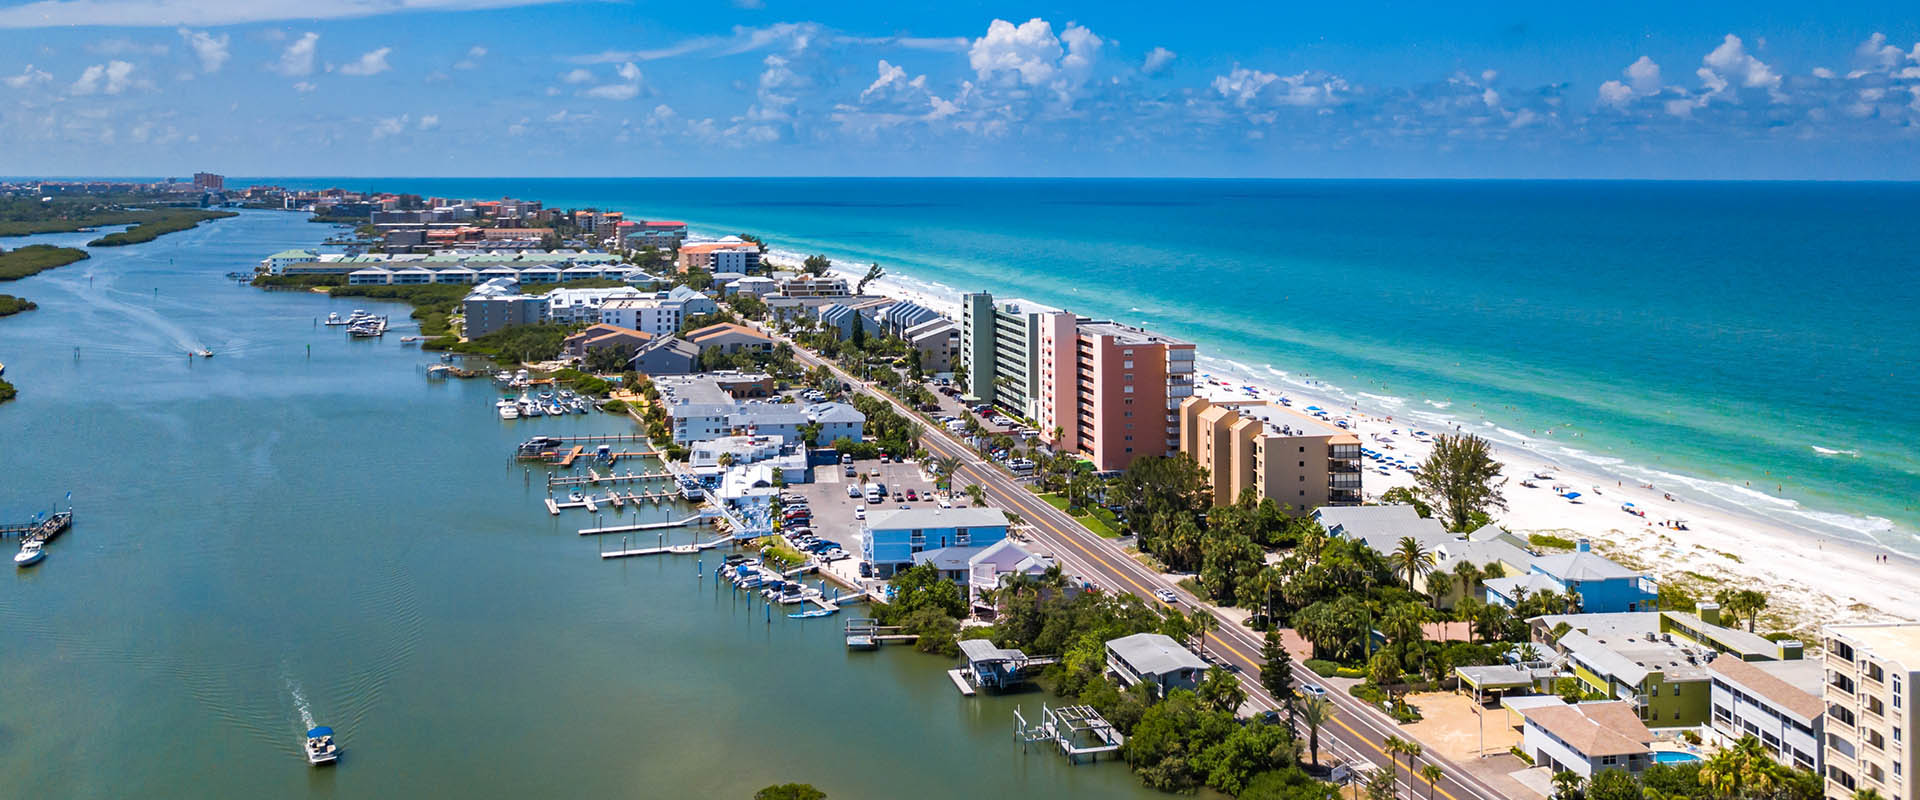 Aerial view by the Sand Castle beach condos on Indian Shores.